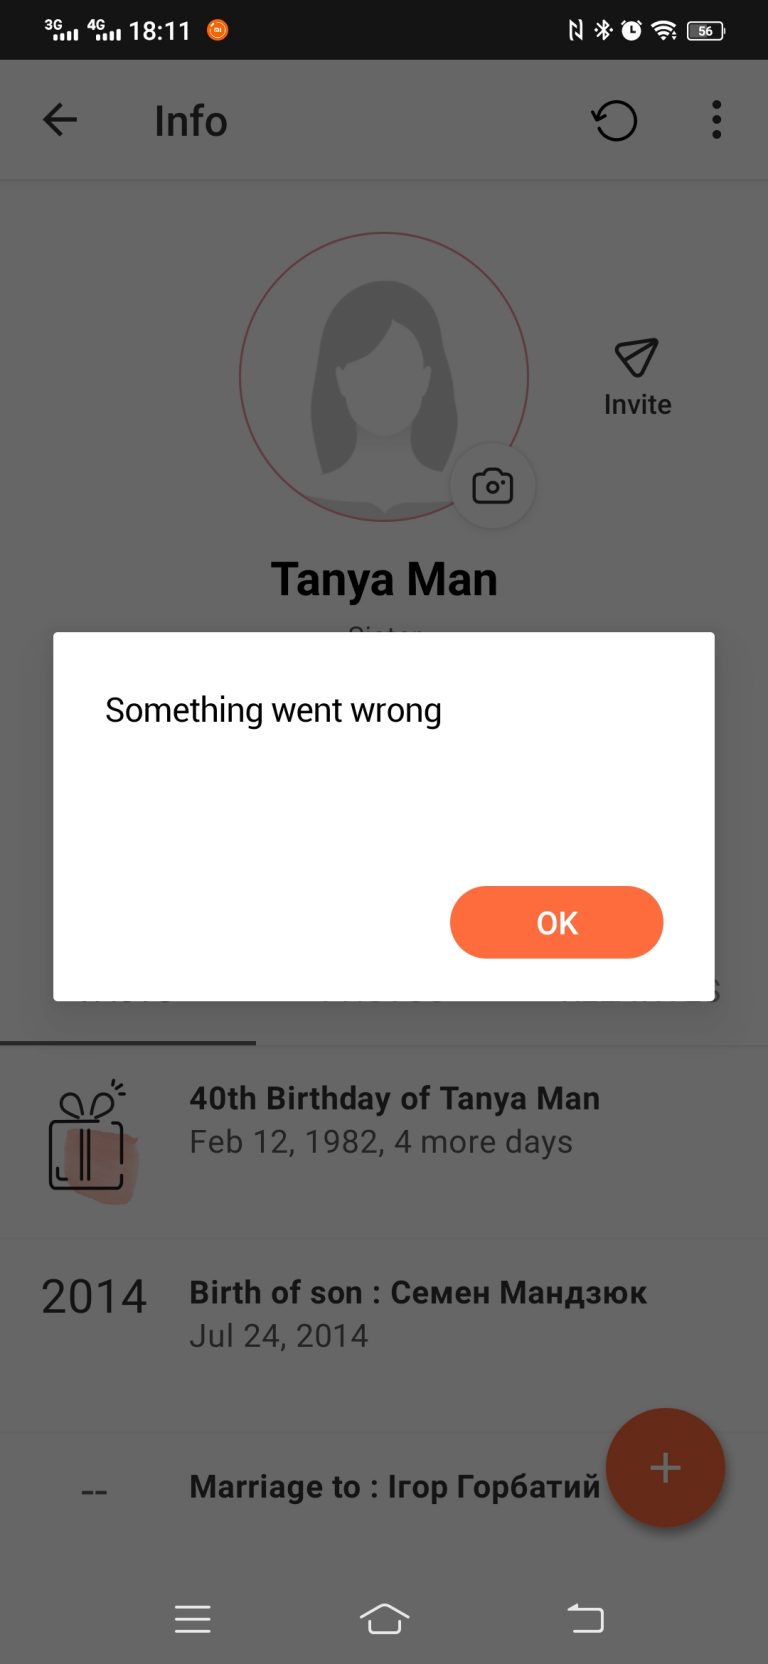 “Something went wrong” error appears when user tries to delete person from family tree